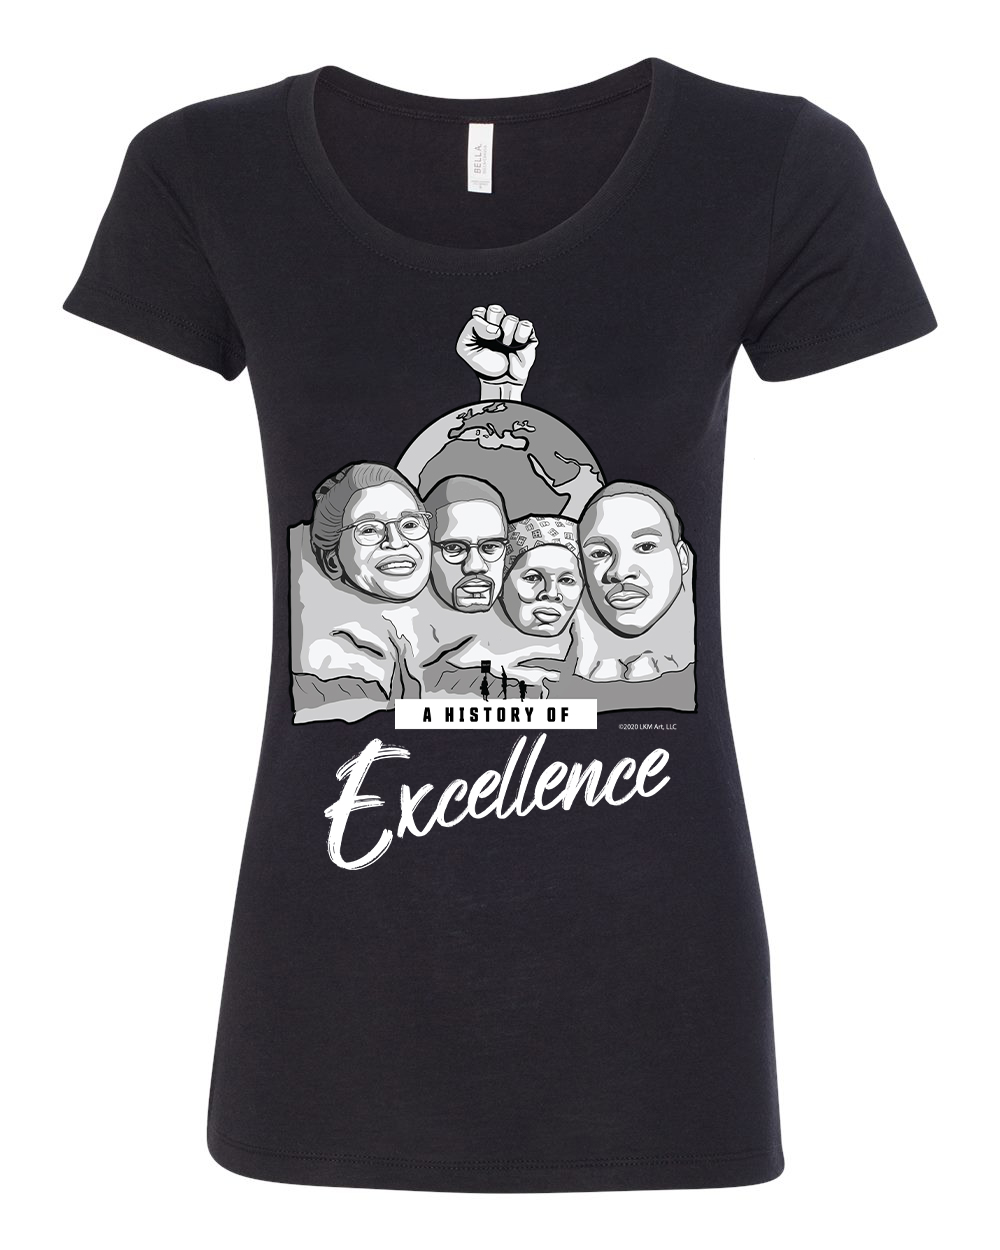 Mount Rushmore - Black Excellence (Black)